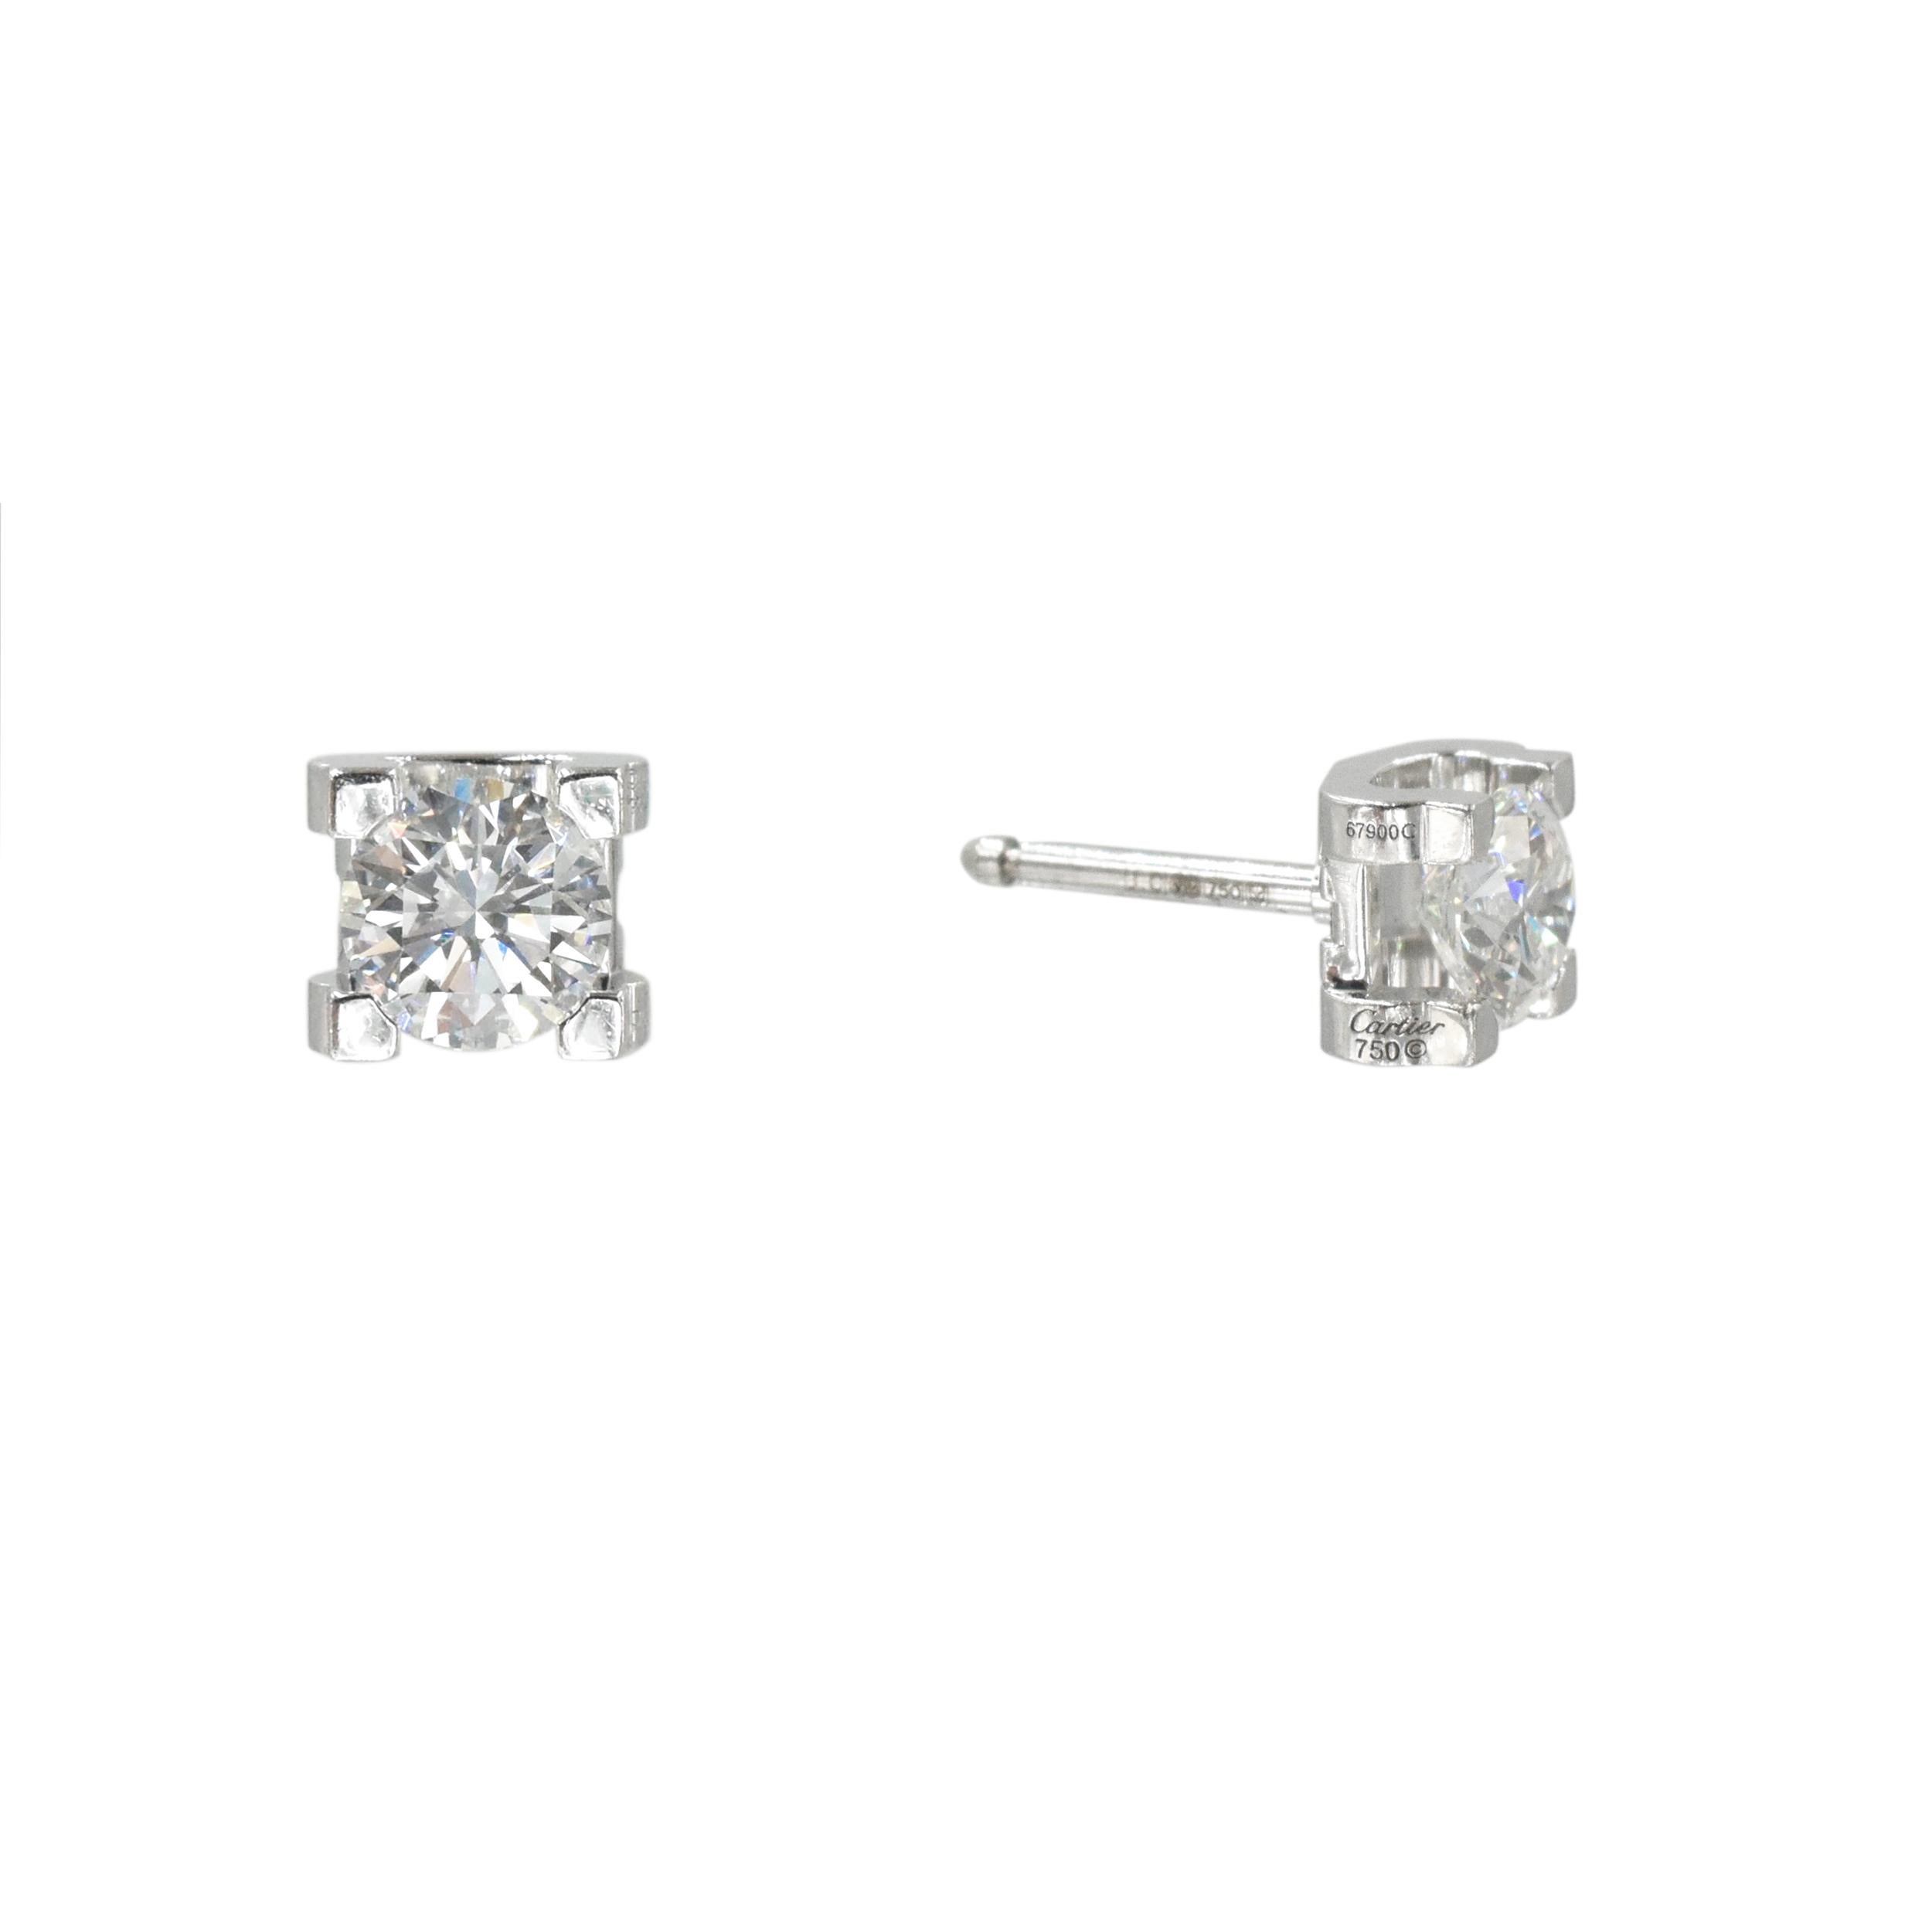 Round Cut C de Cartier in Signature Setting Diamond Studs and Solitaire Necklace Set. For Sale